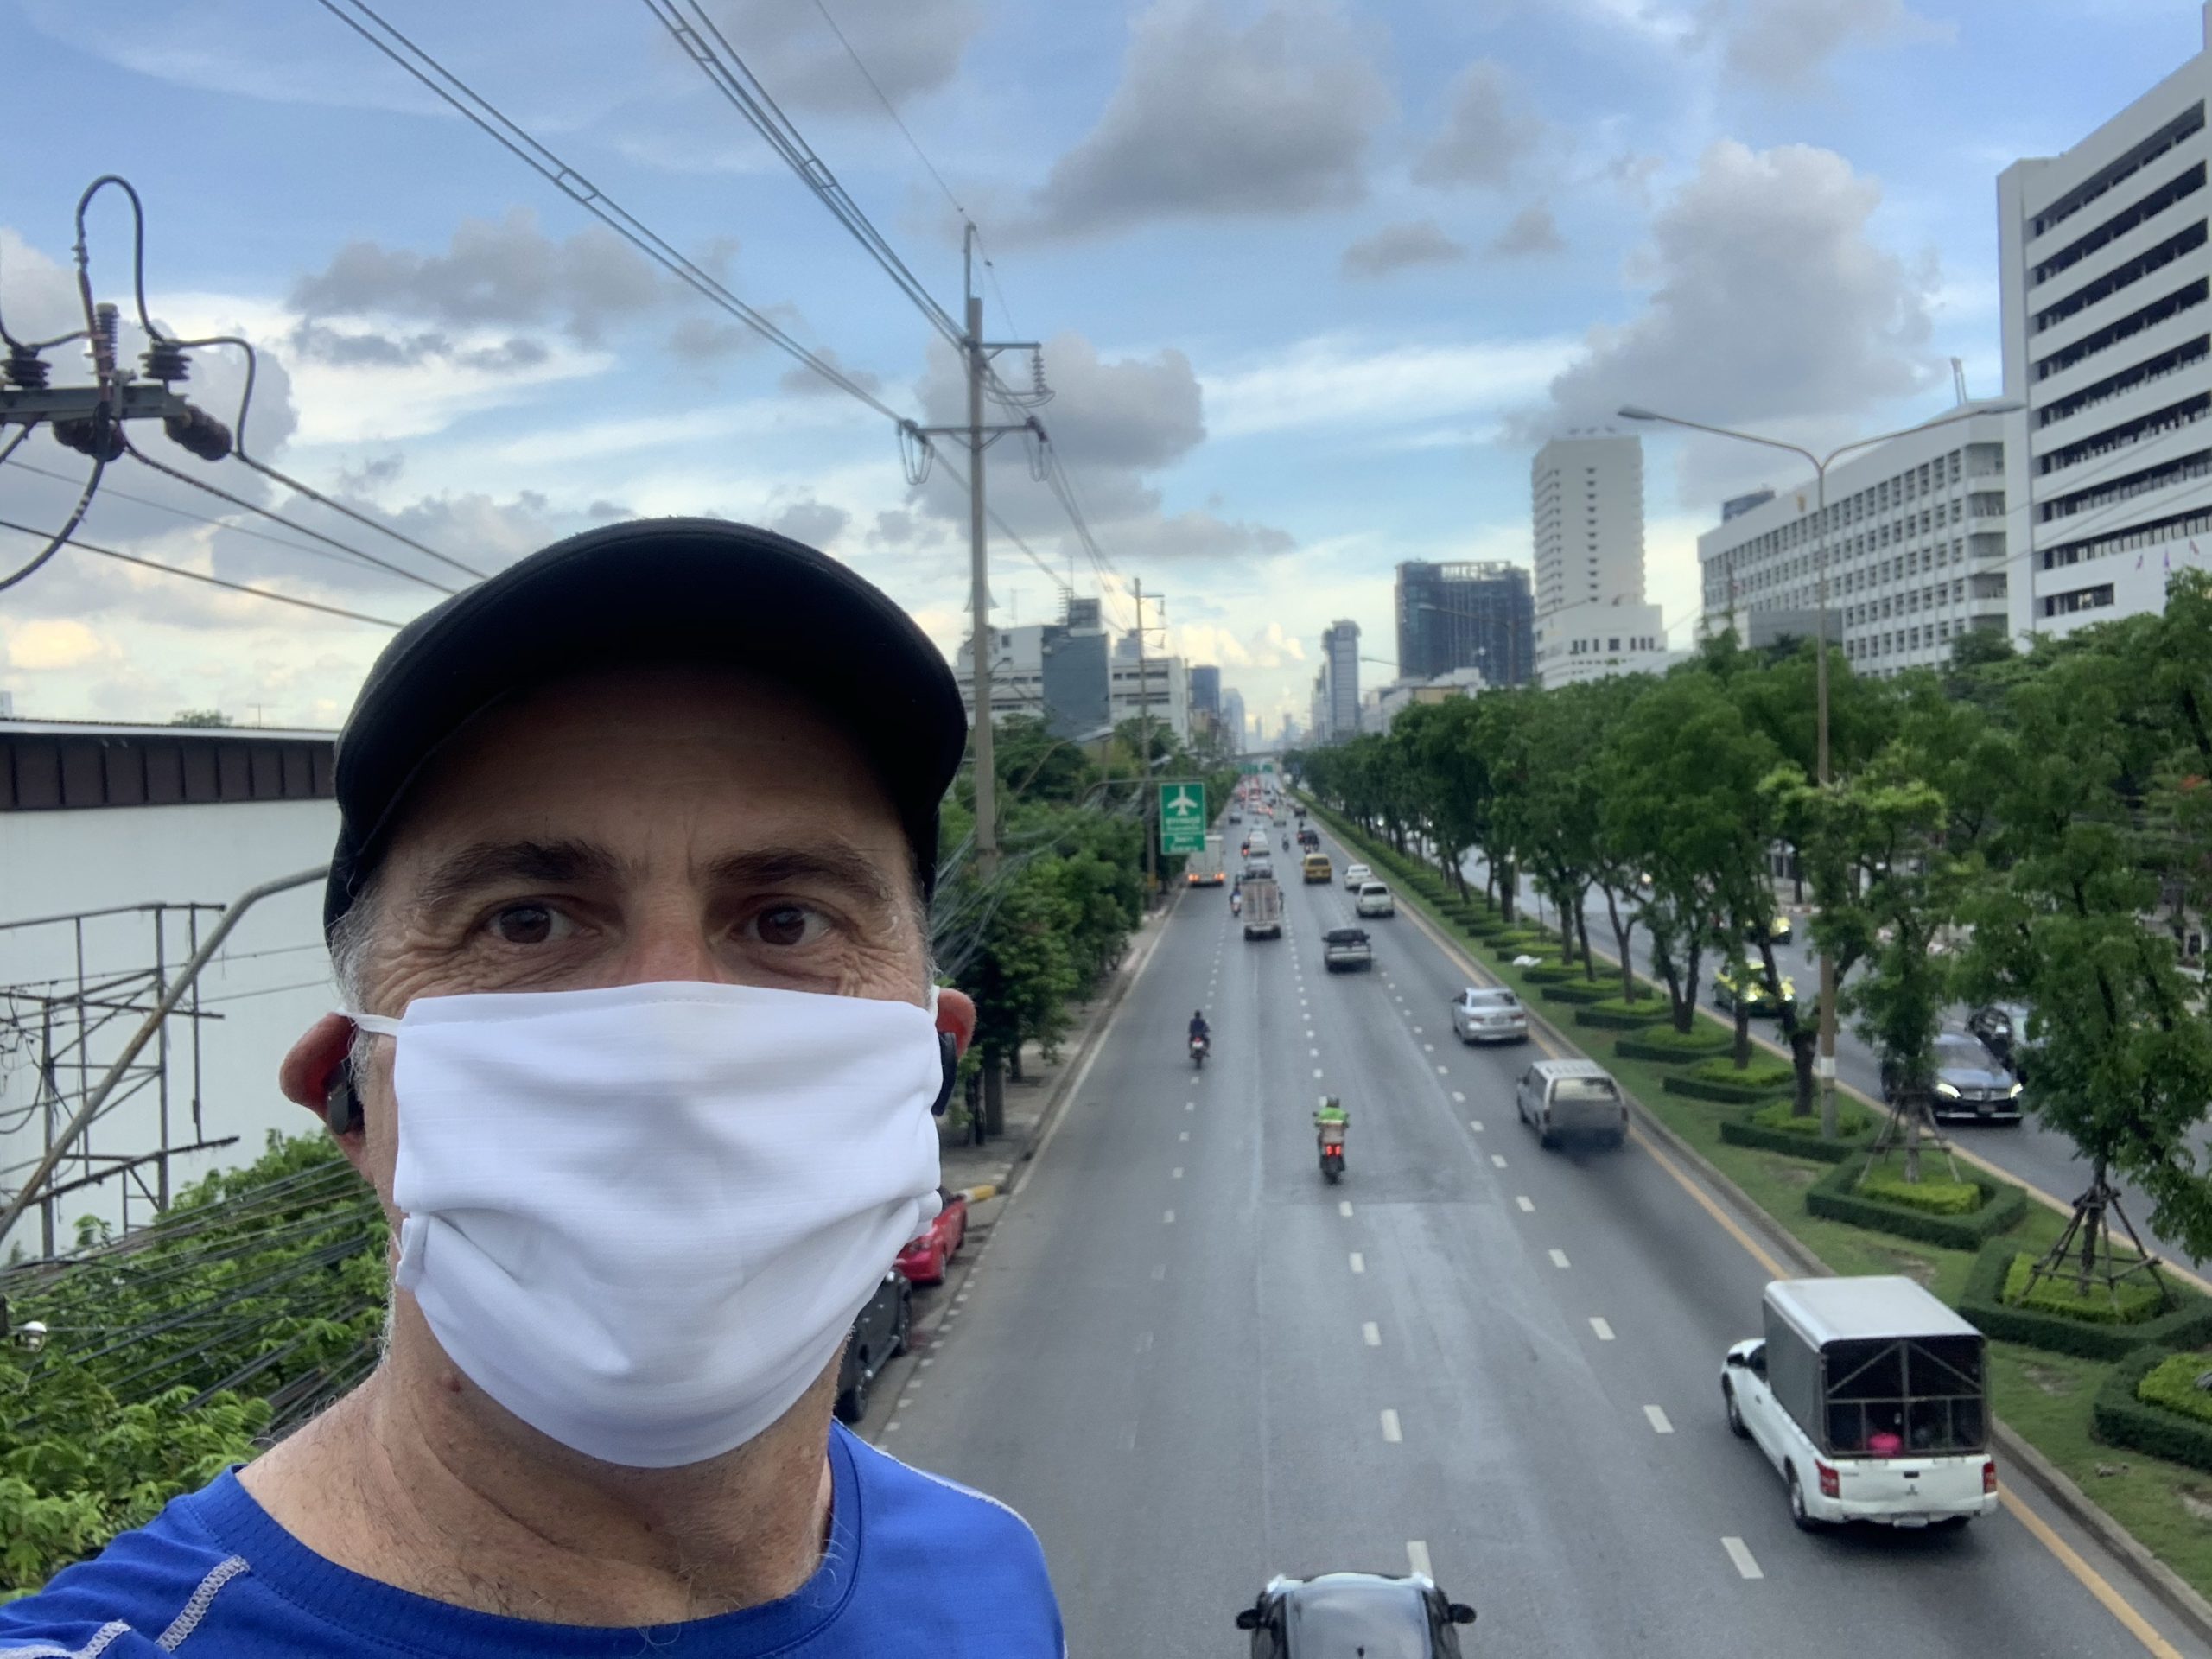 a man wearing a white face mask on a street